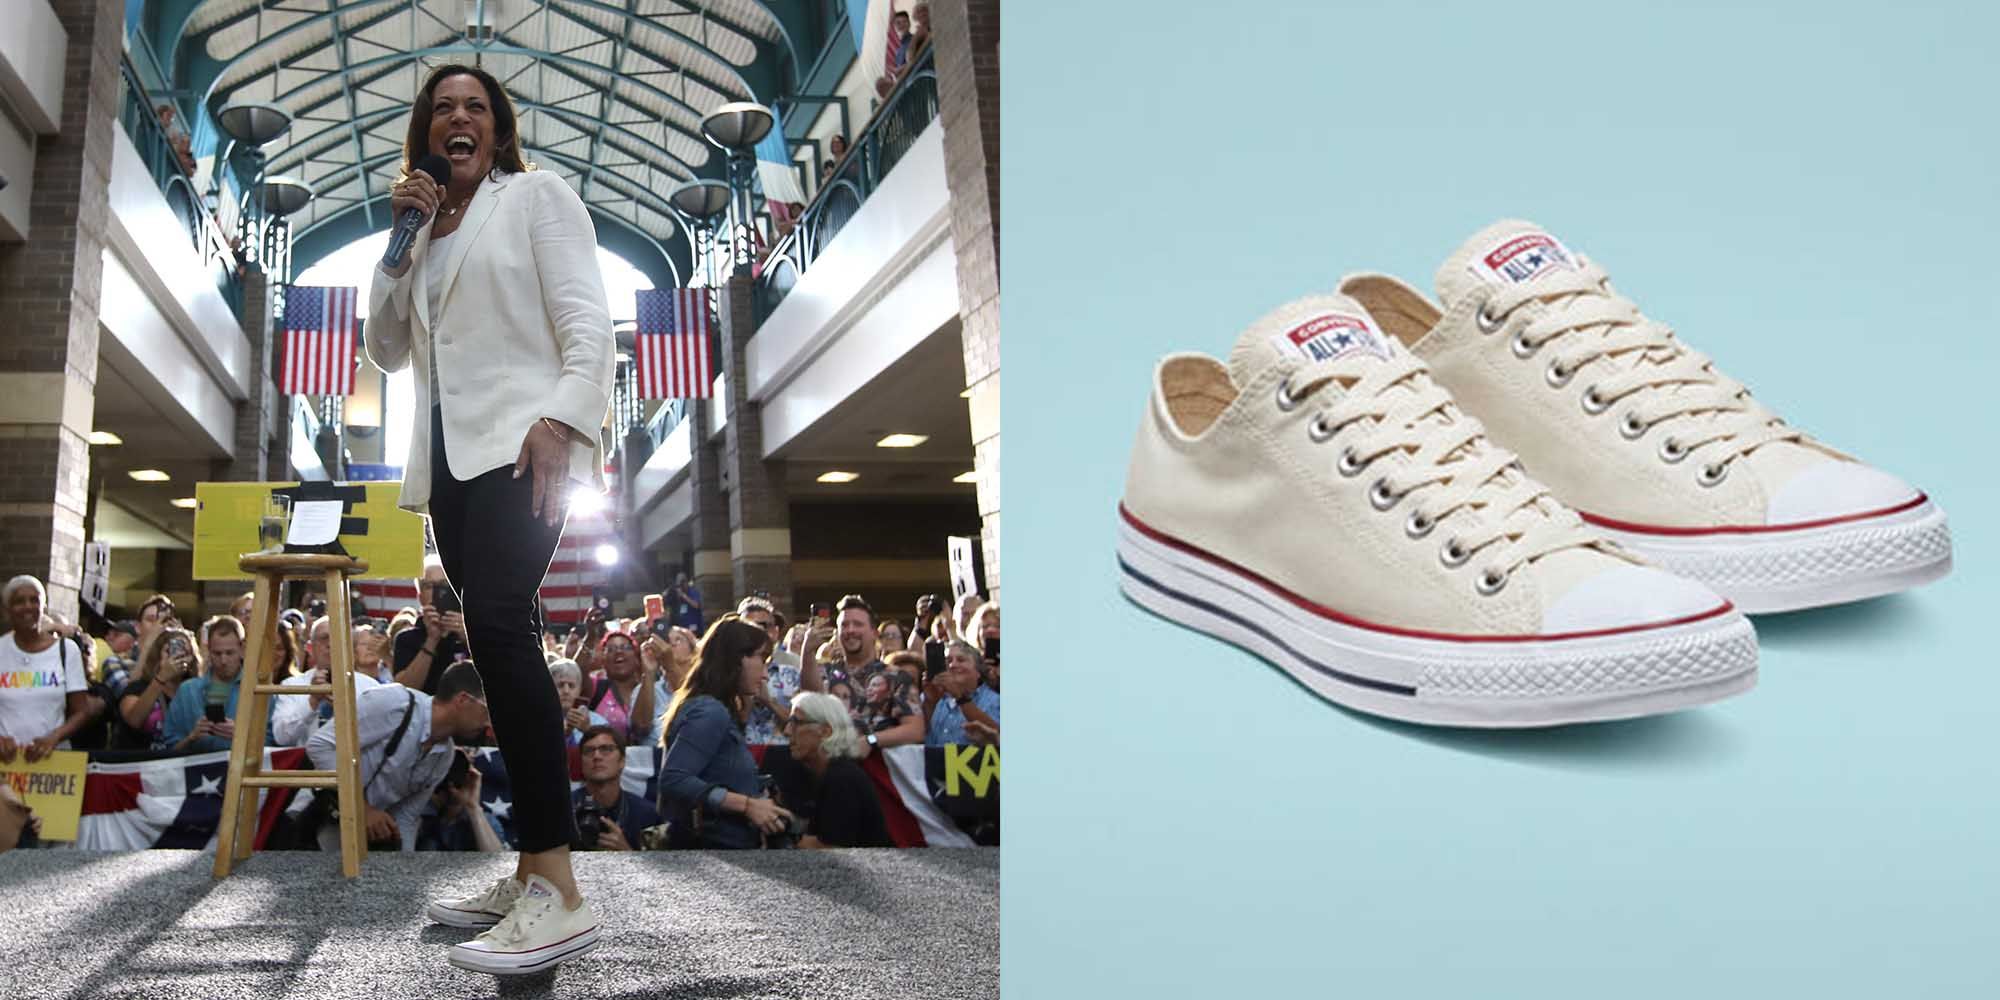 Kamala Harris Loves Converse Sneakers—Here's Why That Matters